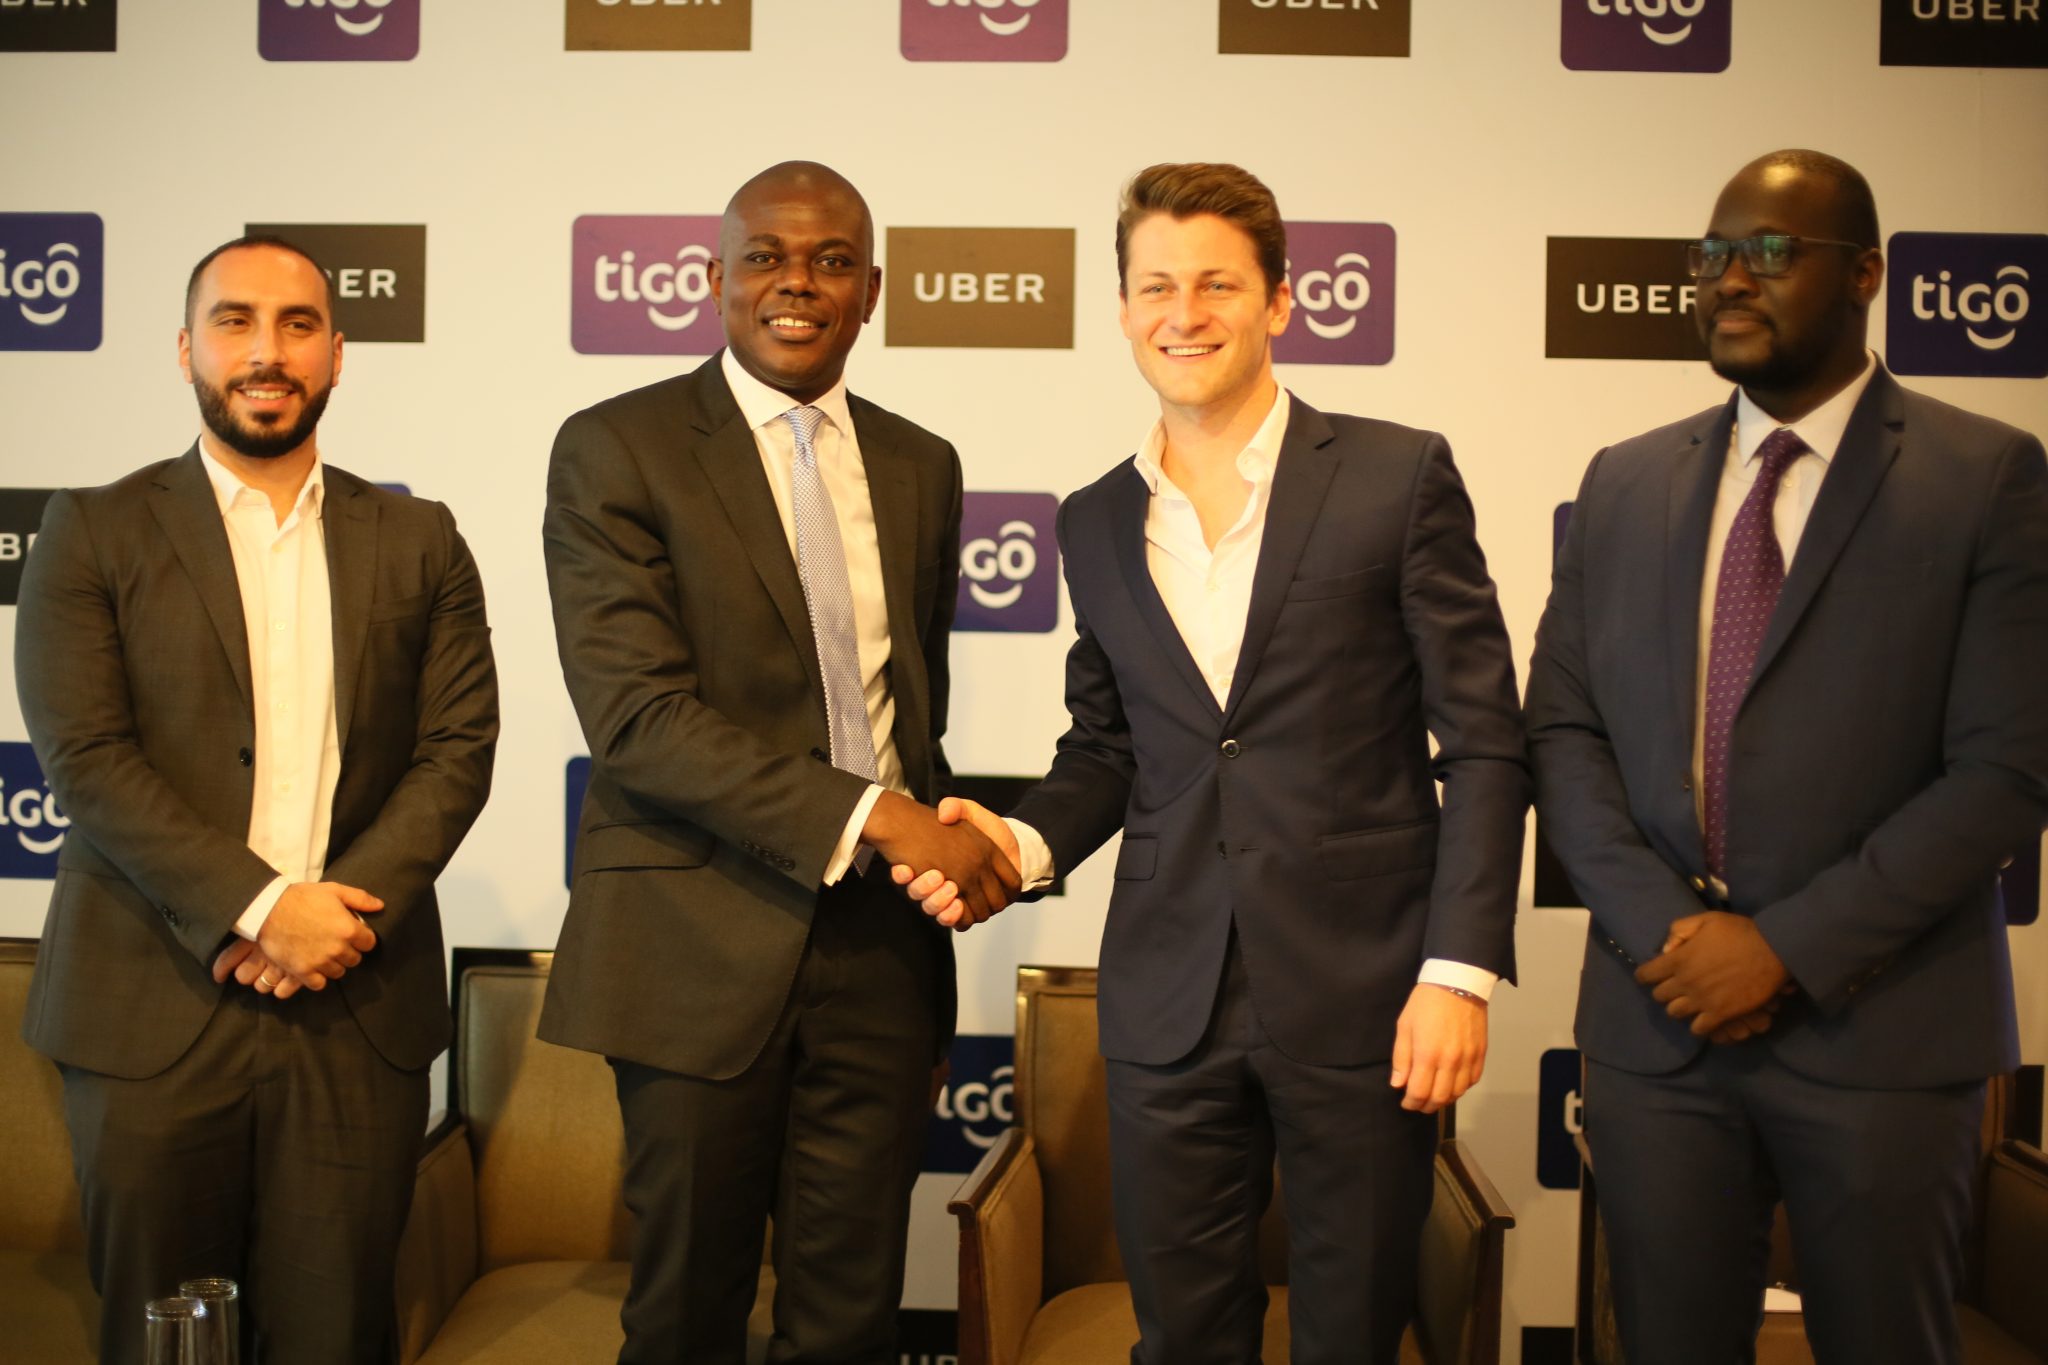 Uber to give free rides to Tigo subscribers to drive the app usage in Tanzania